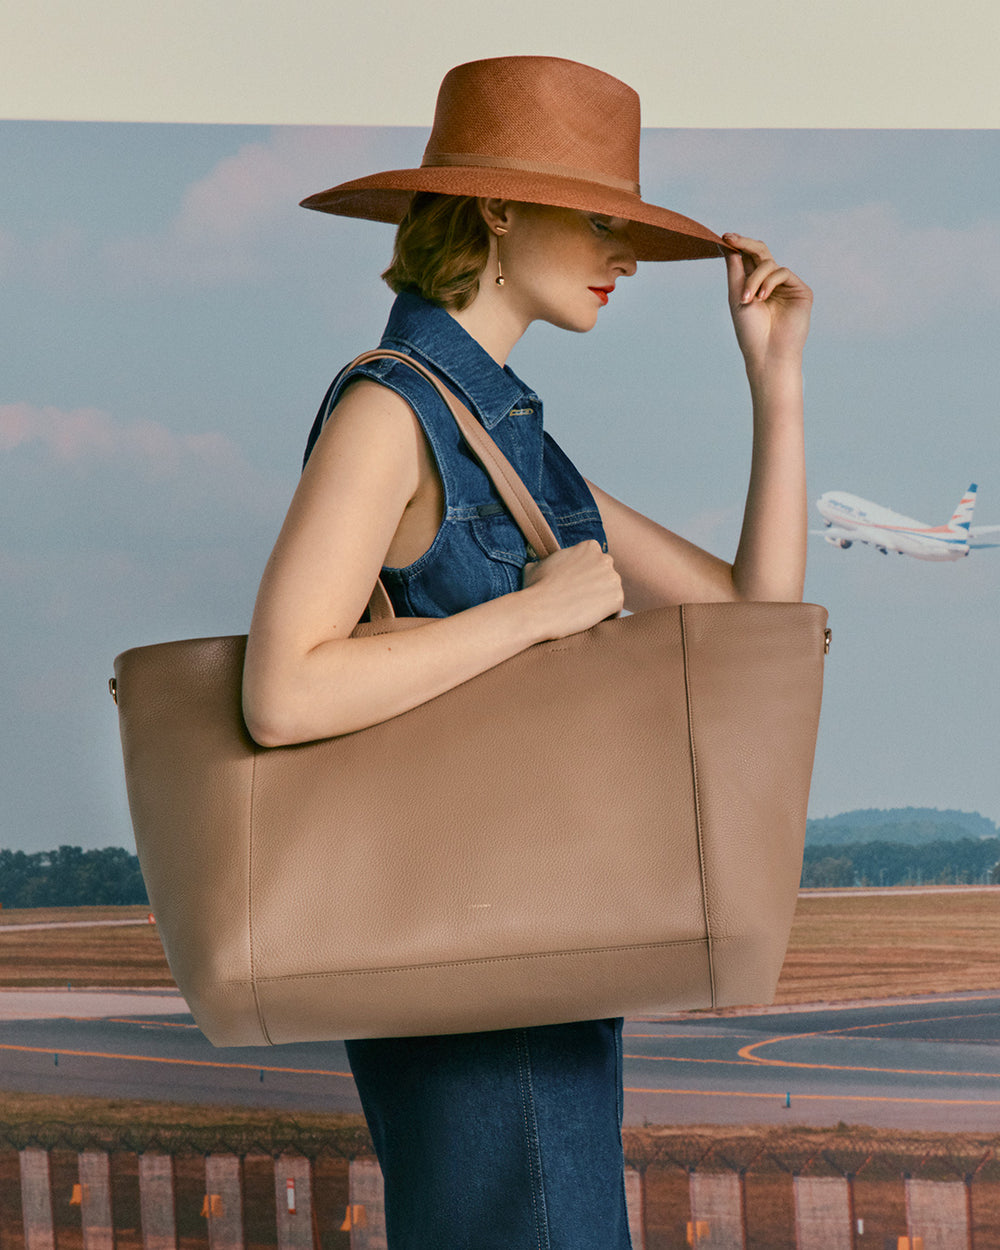 Woman holding large bag, touching hat brim, airplane in background at airport.